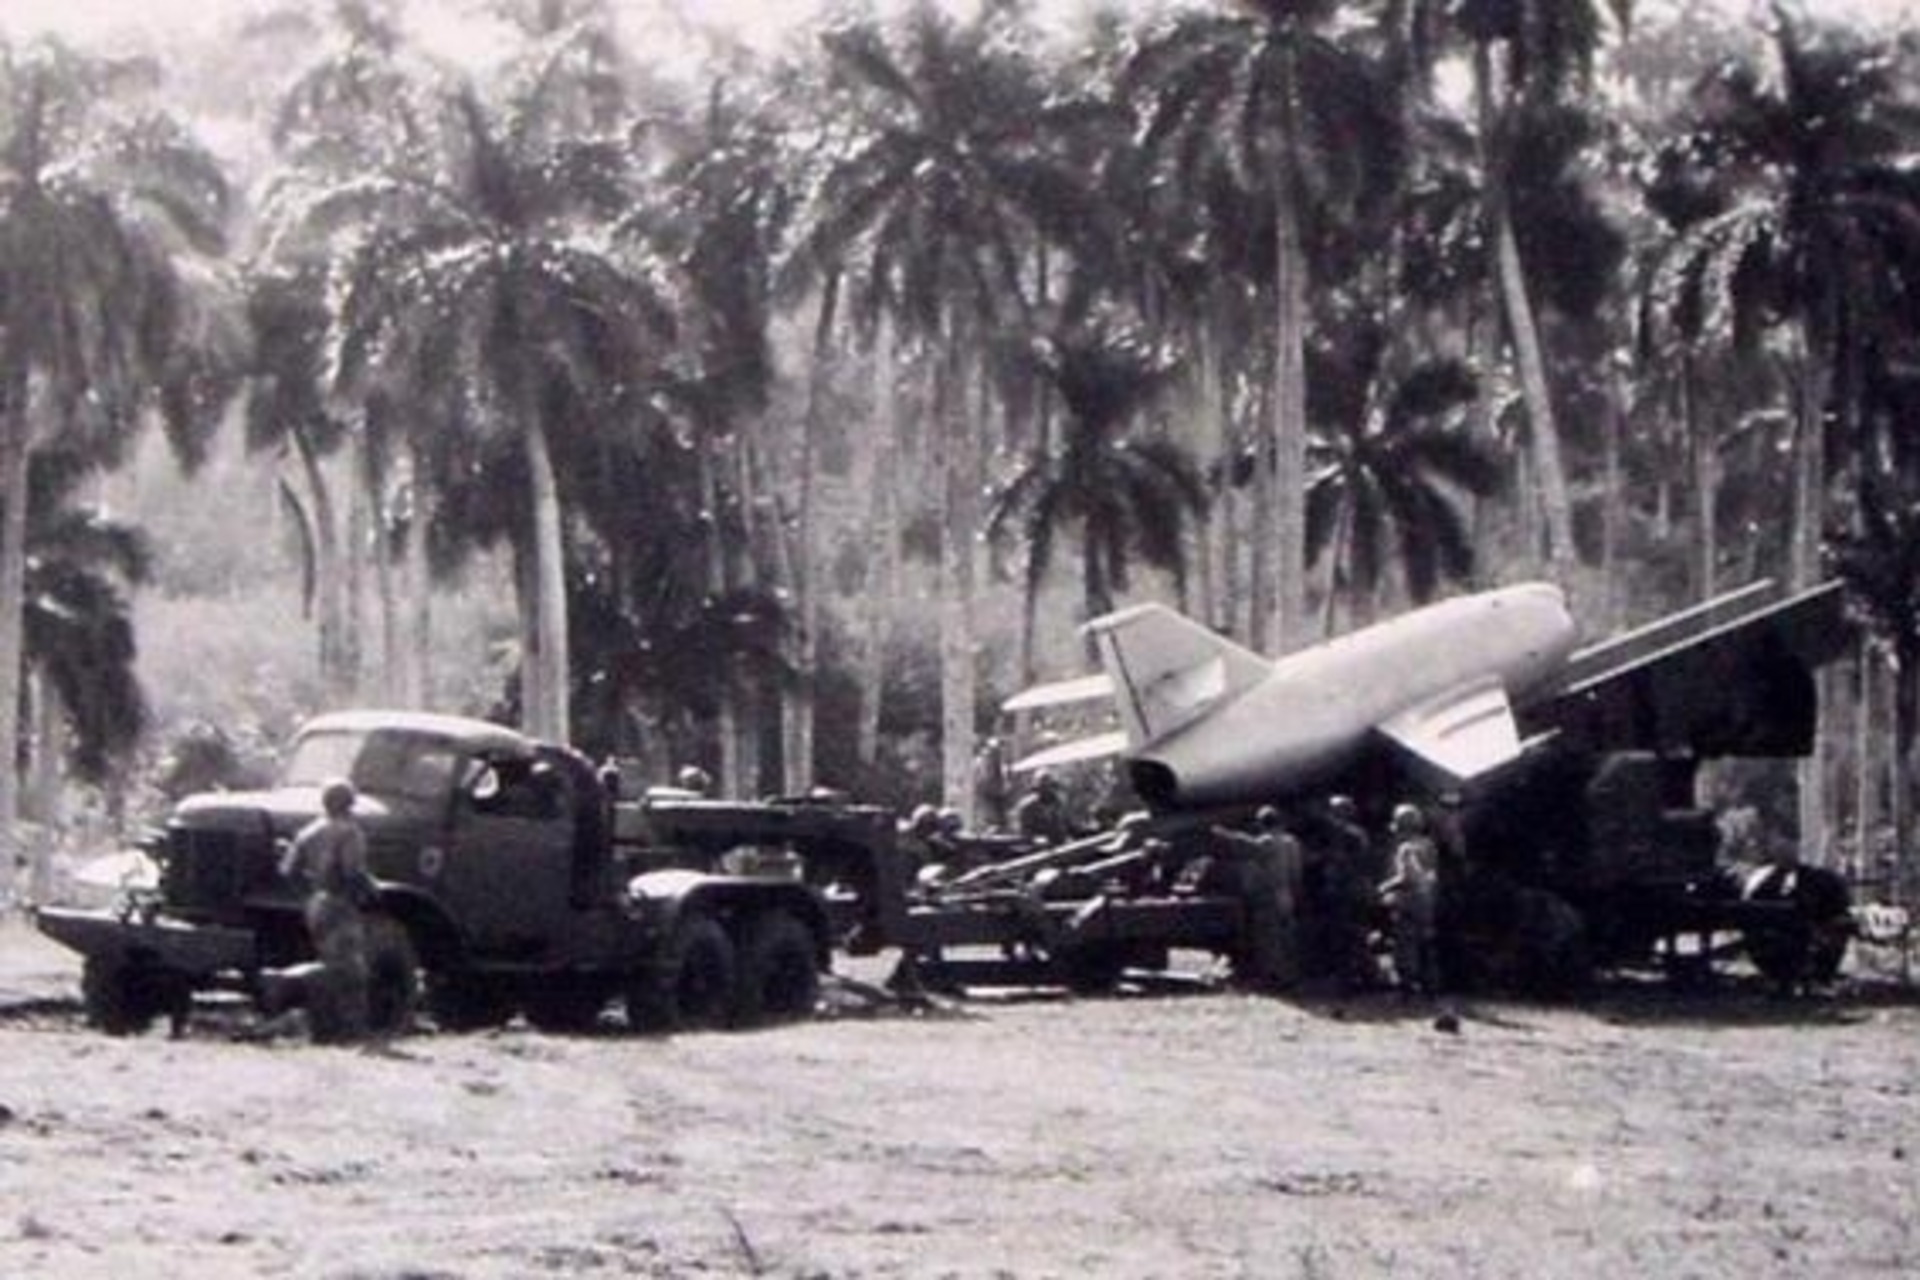 Soviet military installations in Cuba in the summer-autumn of 1962